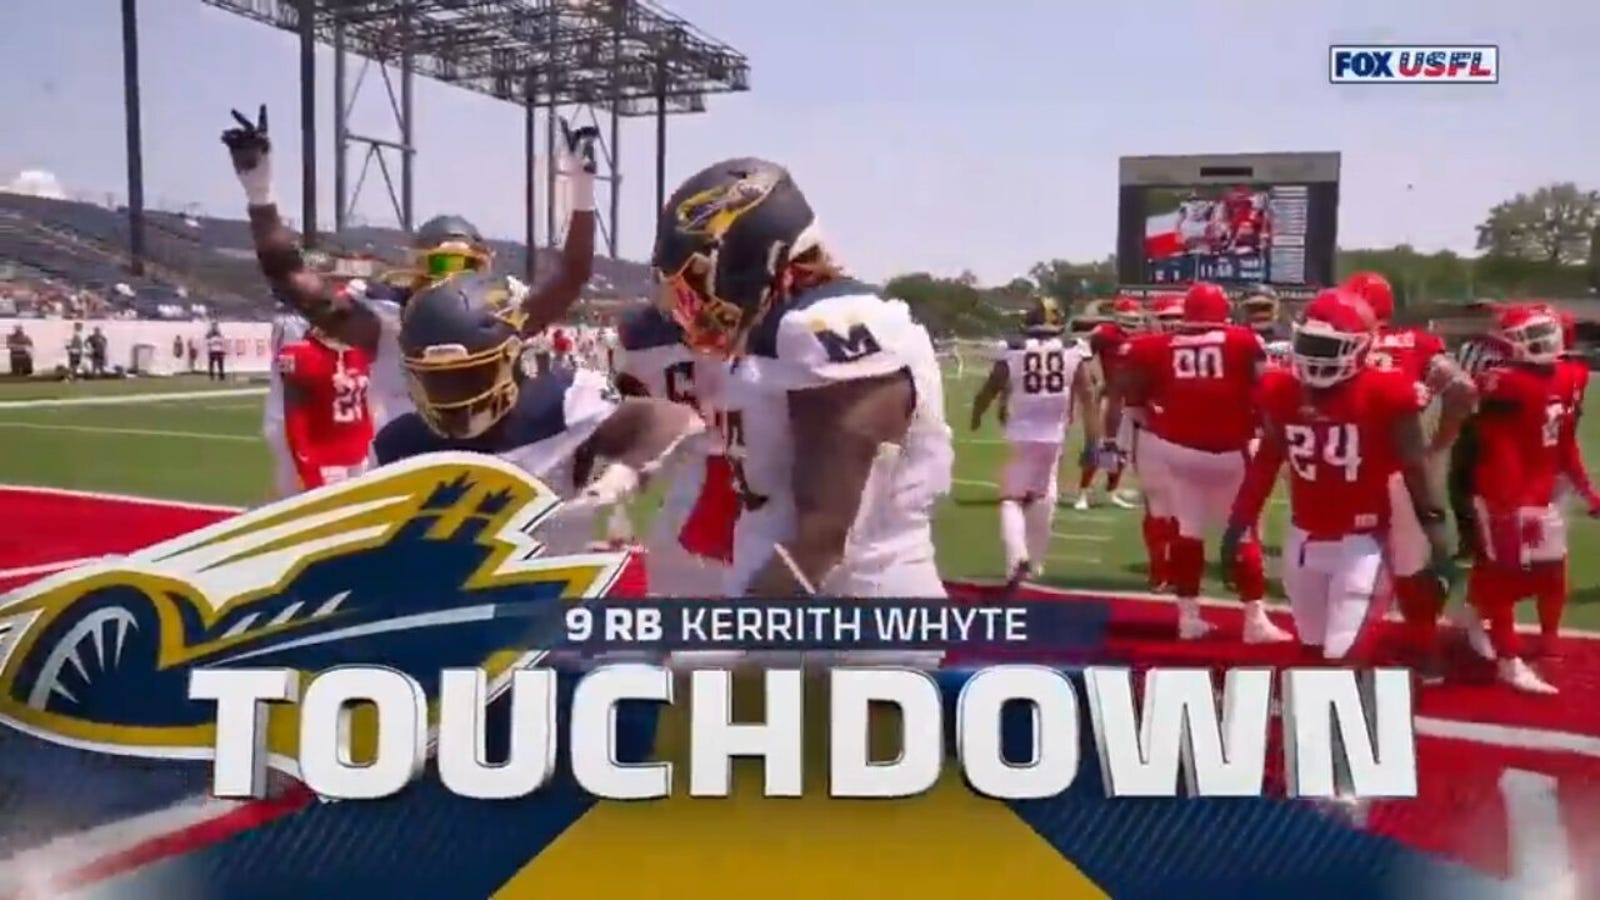 Greg Reaves' WILD interception fuels Kerrith Whyte's touchdown as Showboats extend early lead over Generals